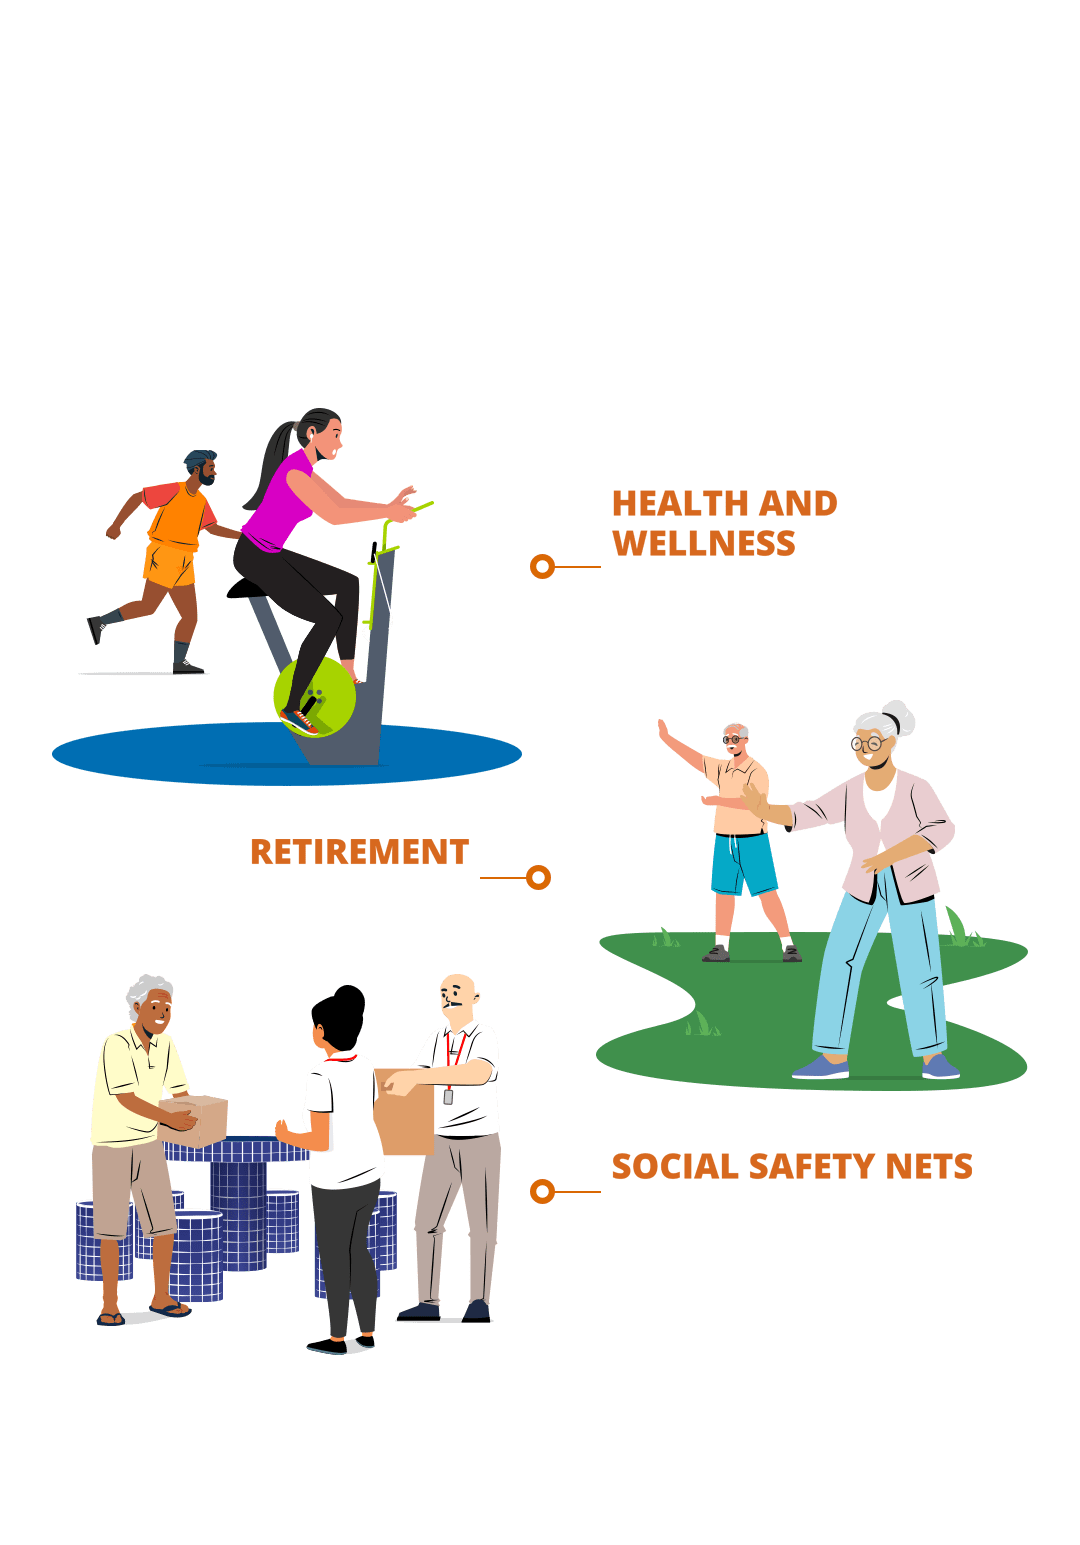 Health and Wellness, Retirement, Social Safety Nets